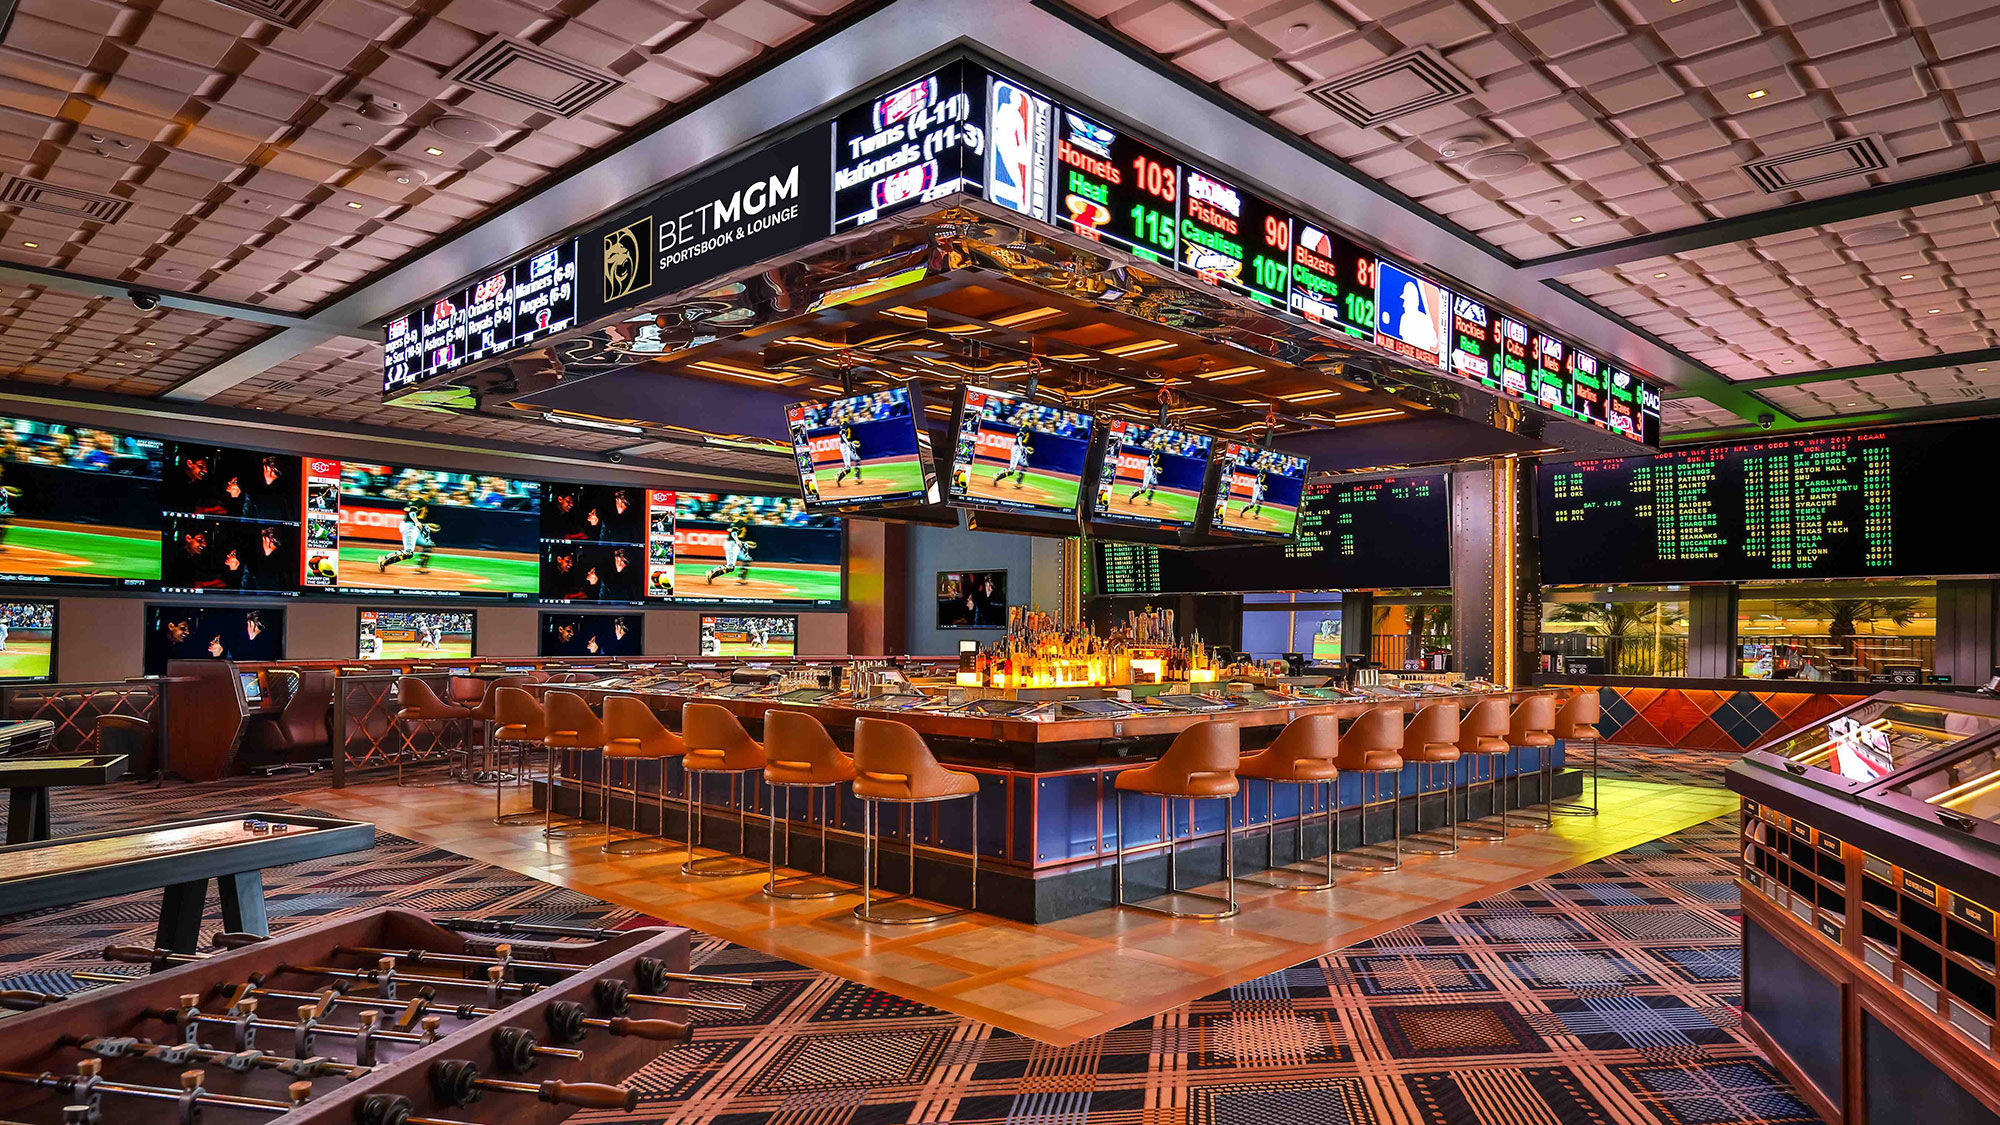 The sports bar at the Cosmopolitan features LED video walls, dozens of TV screens and 23 video poker machines as well as pool tables and foosball.